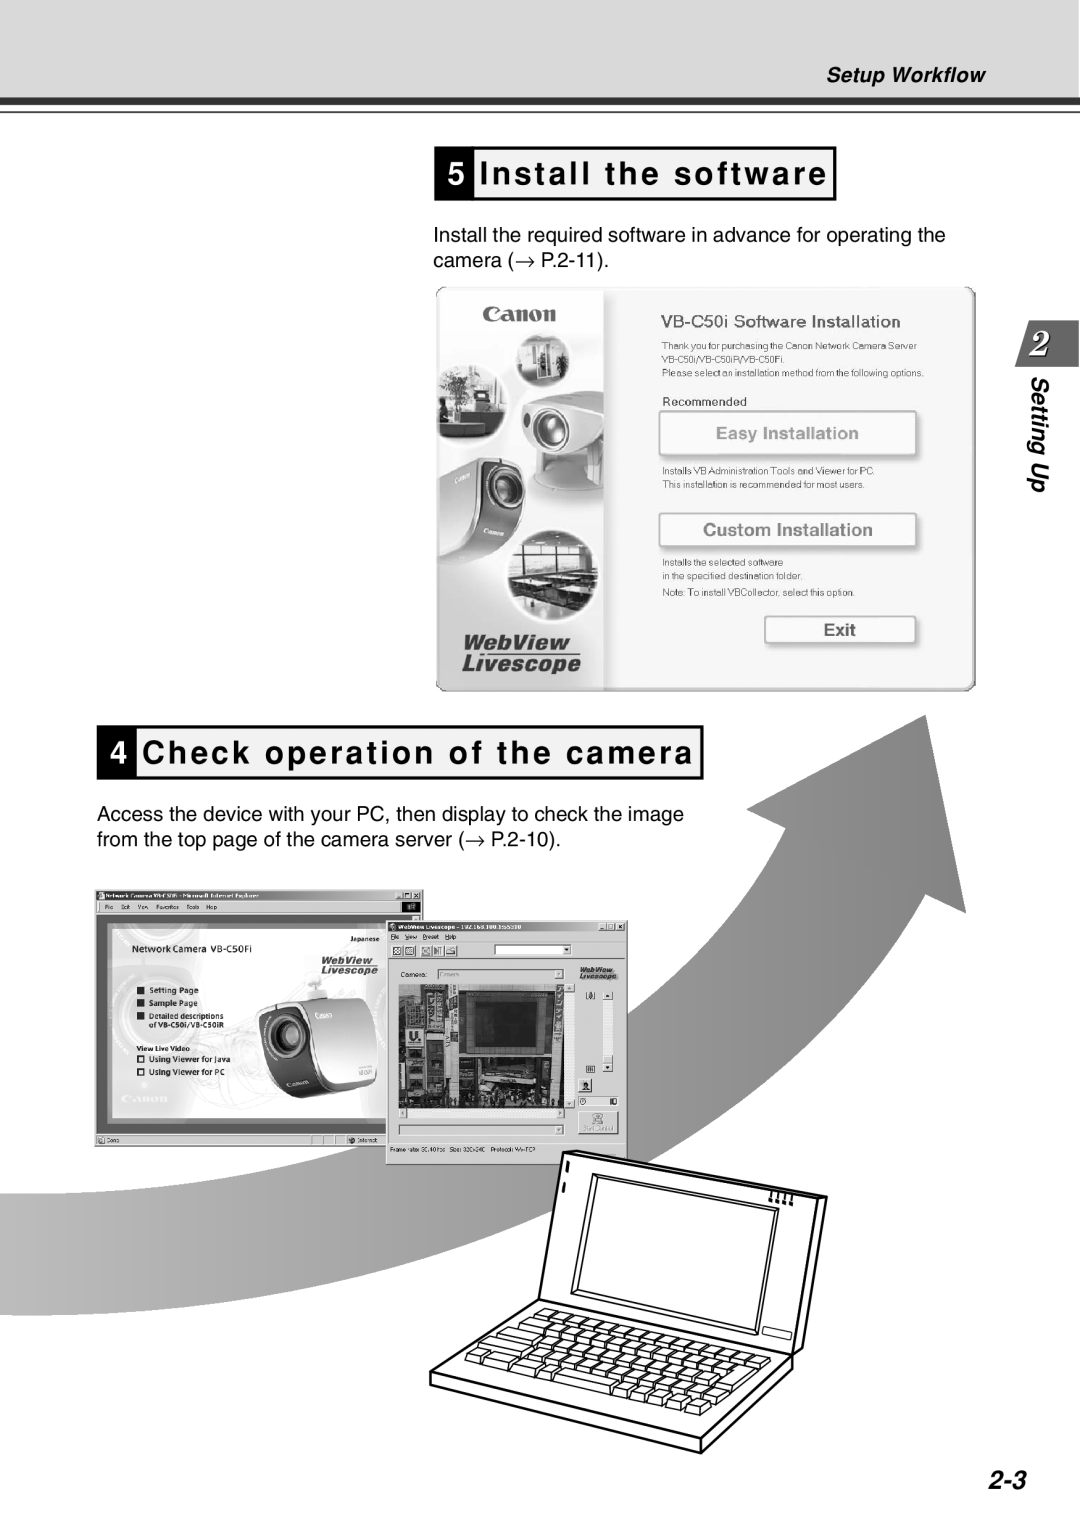 Canon Vb-C50fi user manual Install the software, Check operation of the camera, Setting Up, Setup Workflow 